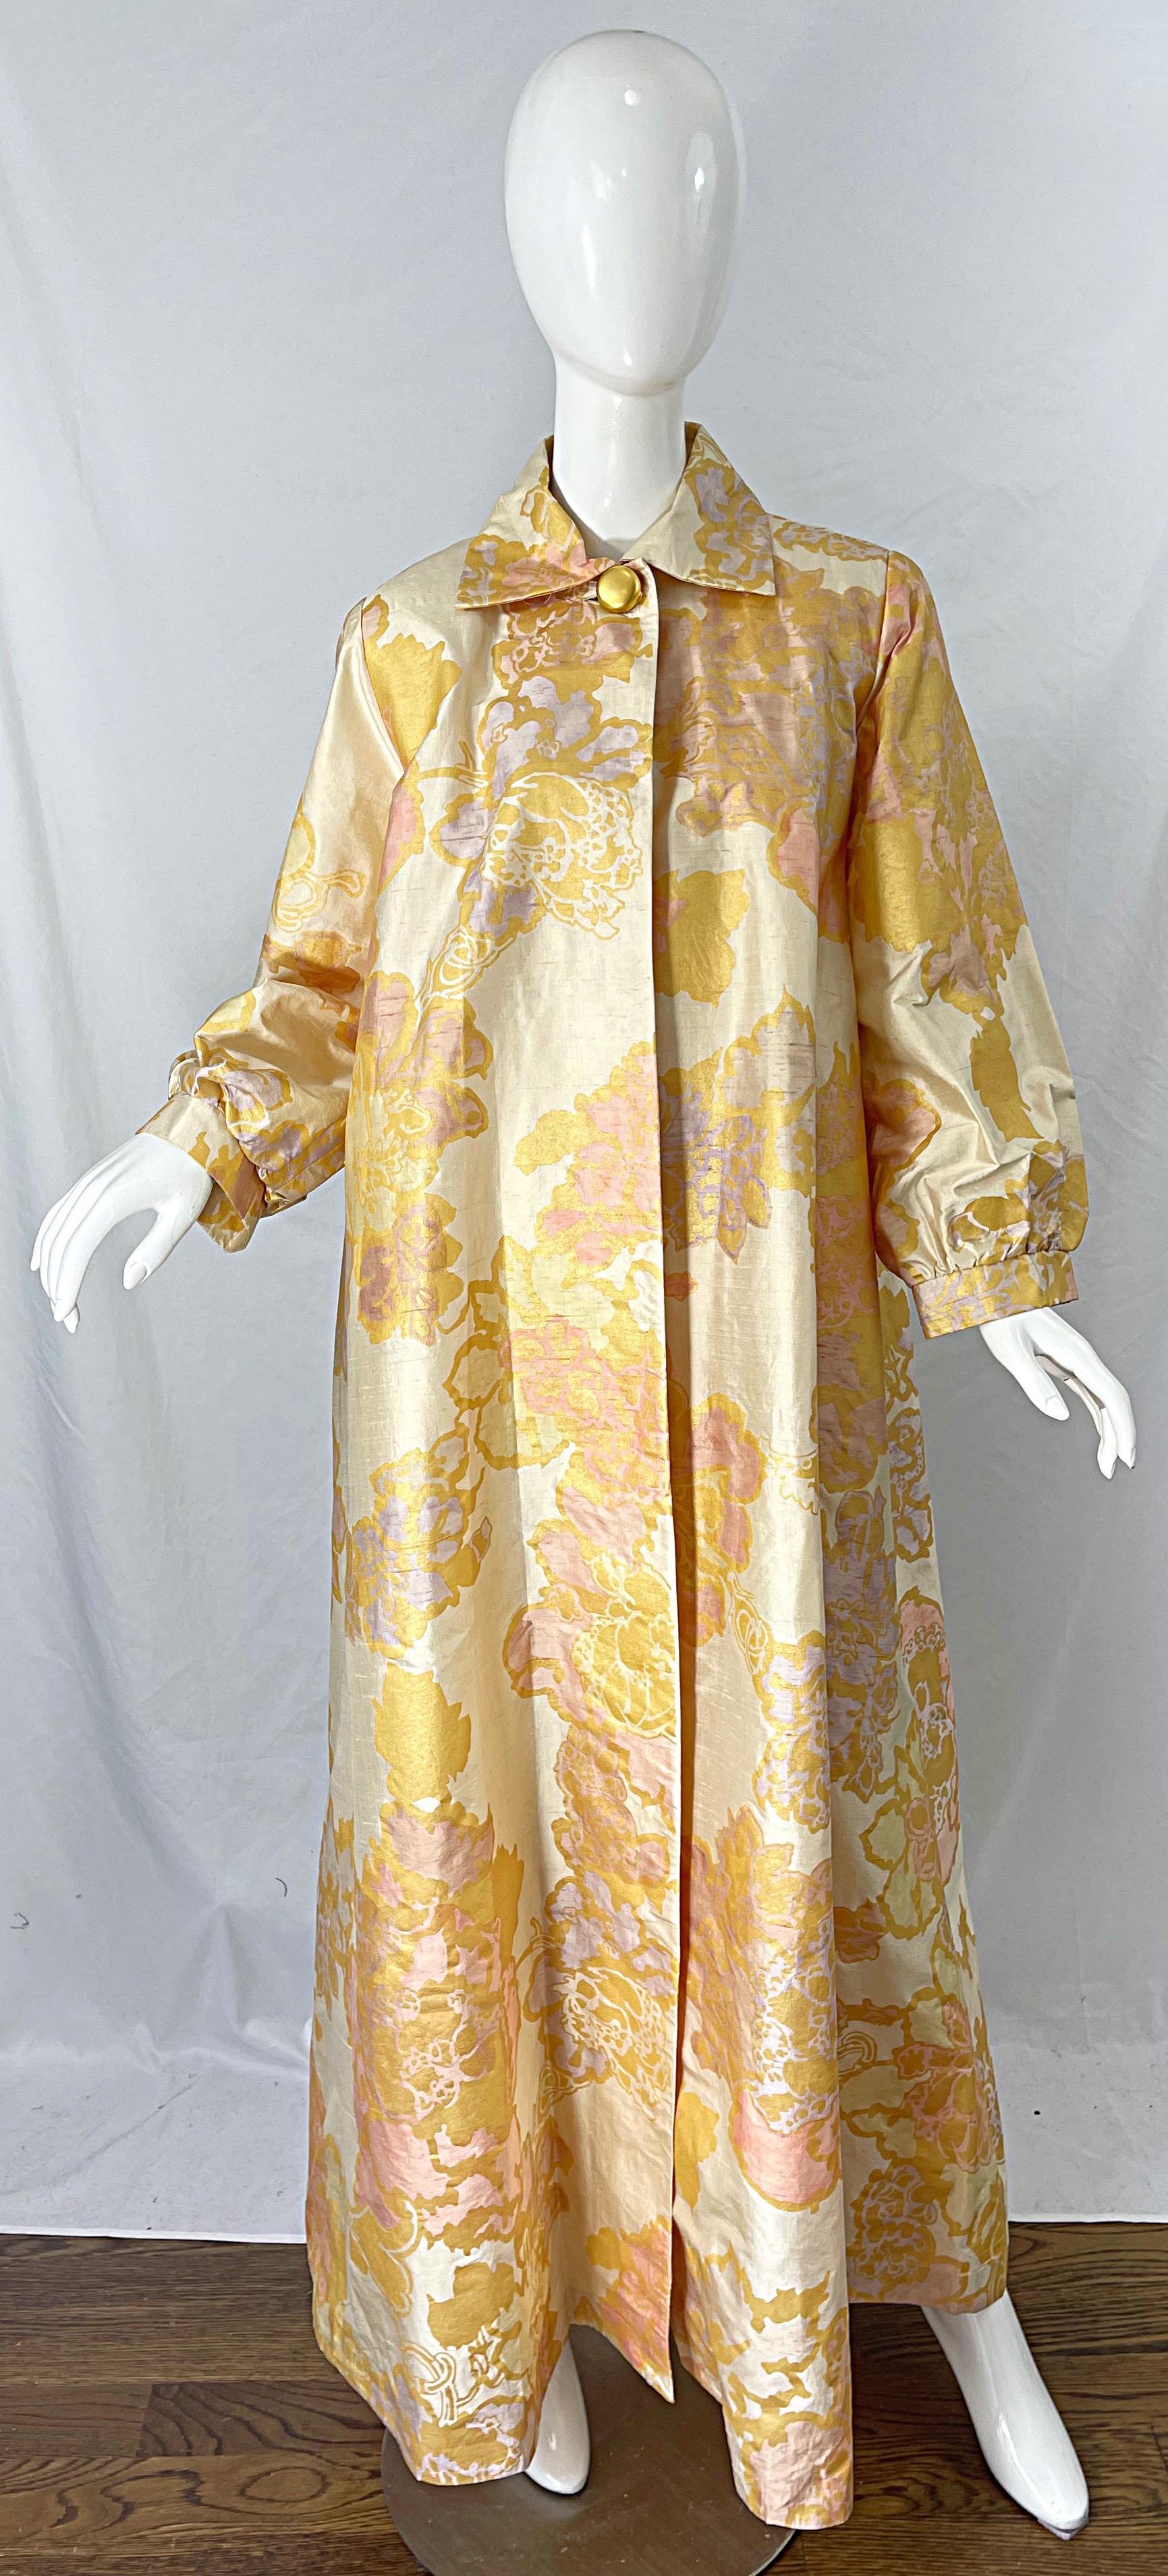 Gorgeous 90s hand painted couture quality silk taffeta pink, ivory and gold abstract print opera coat ! Features a regal floral abstract print throughout. Gold matte button at top center neck. Pockets at each side of the waist. Fully lined. Great